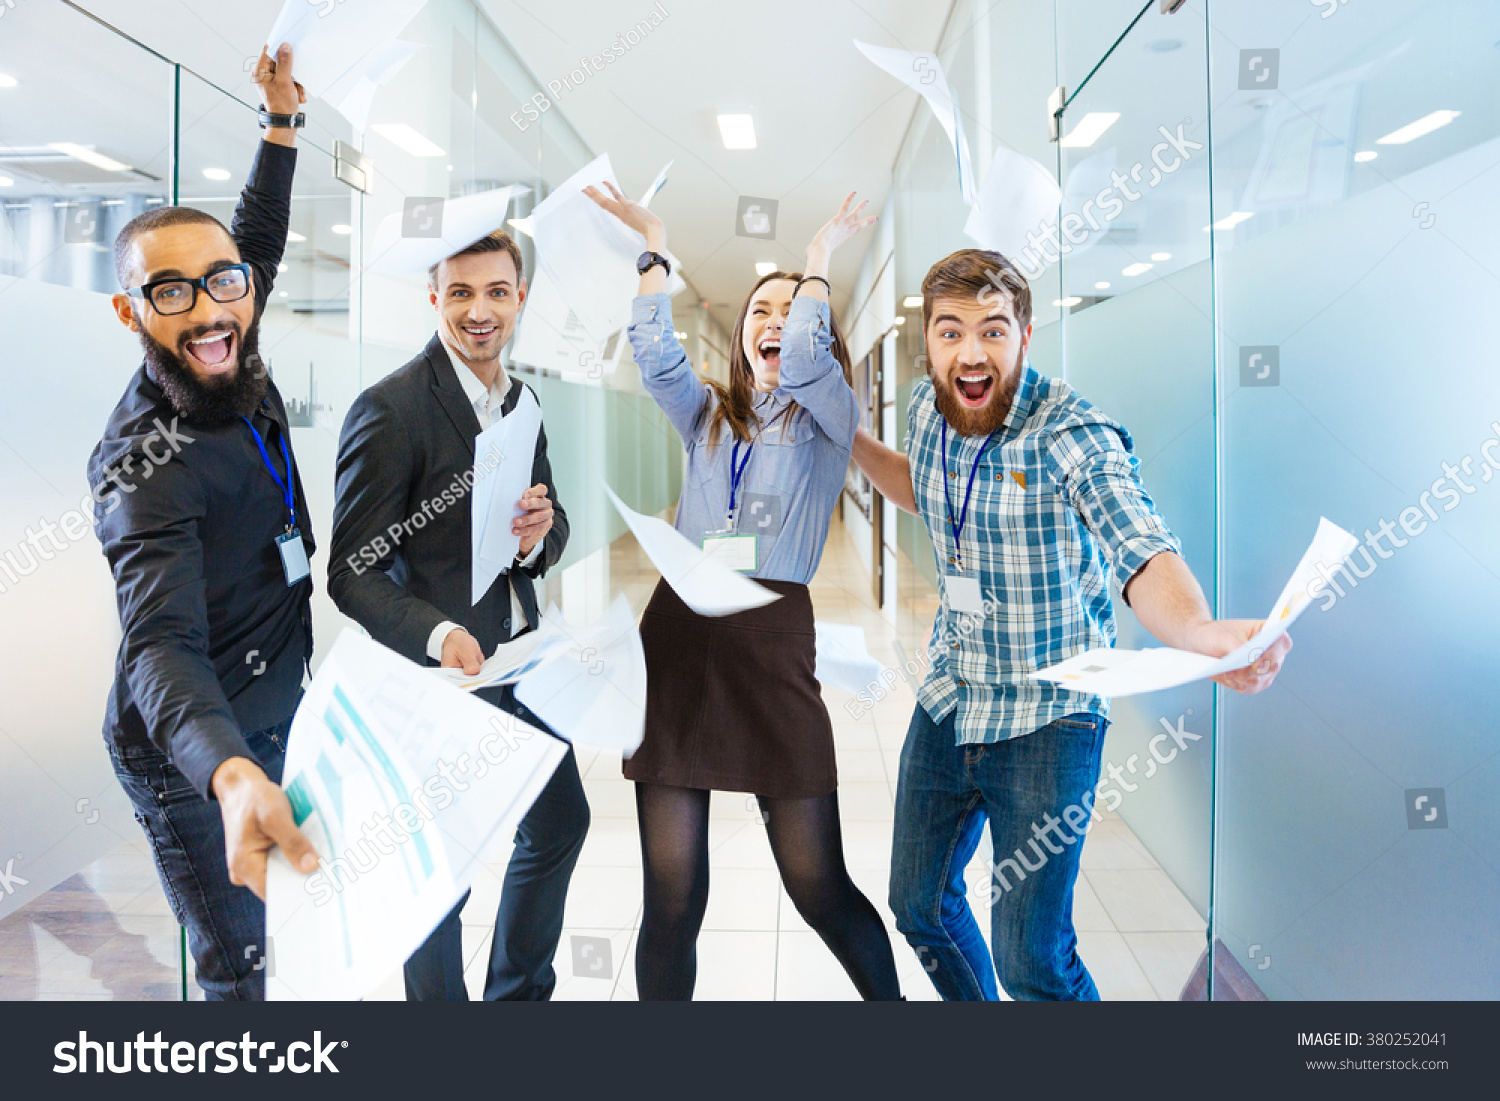 Group of joyful excited business people throwing papers and having fun in office #380252041